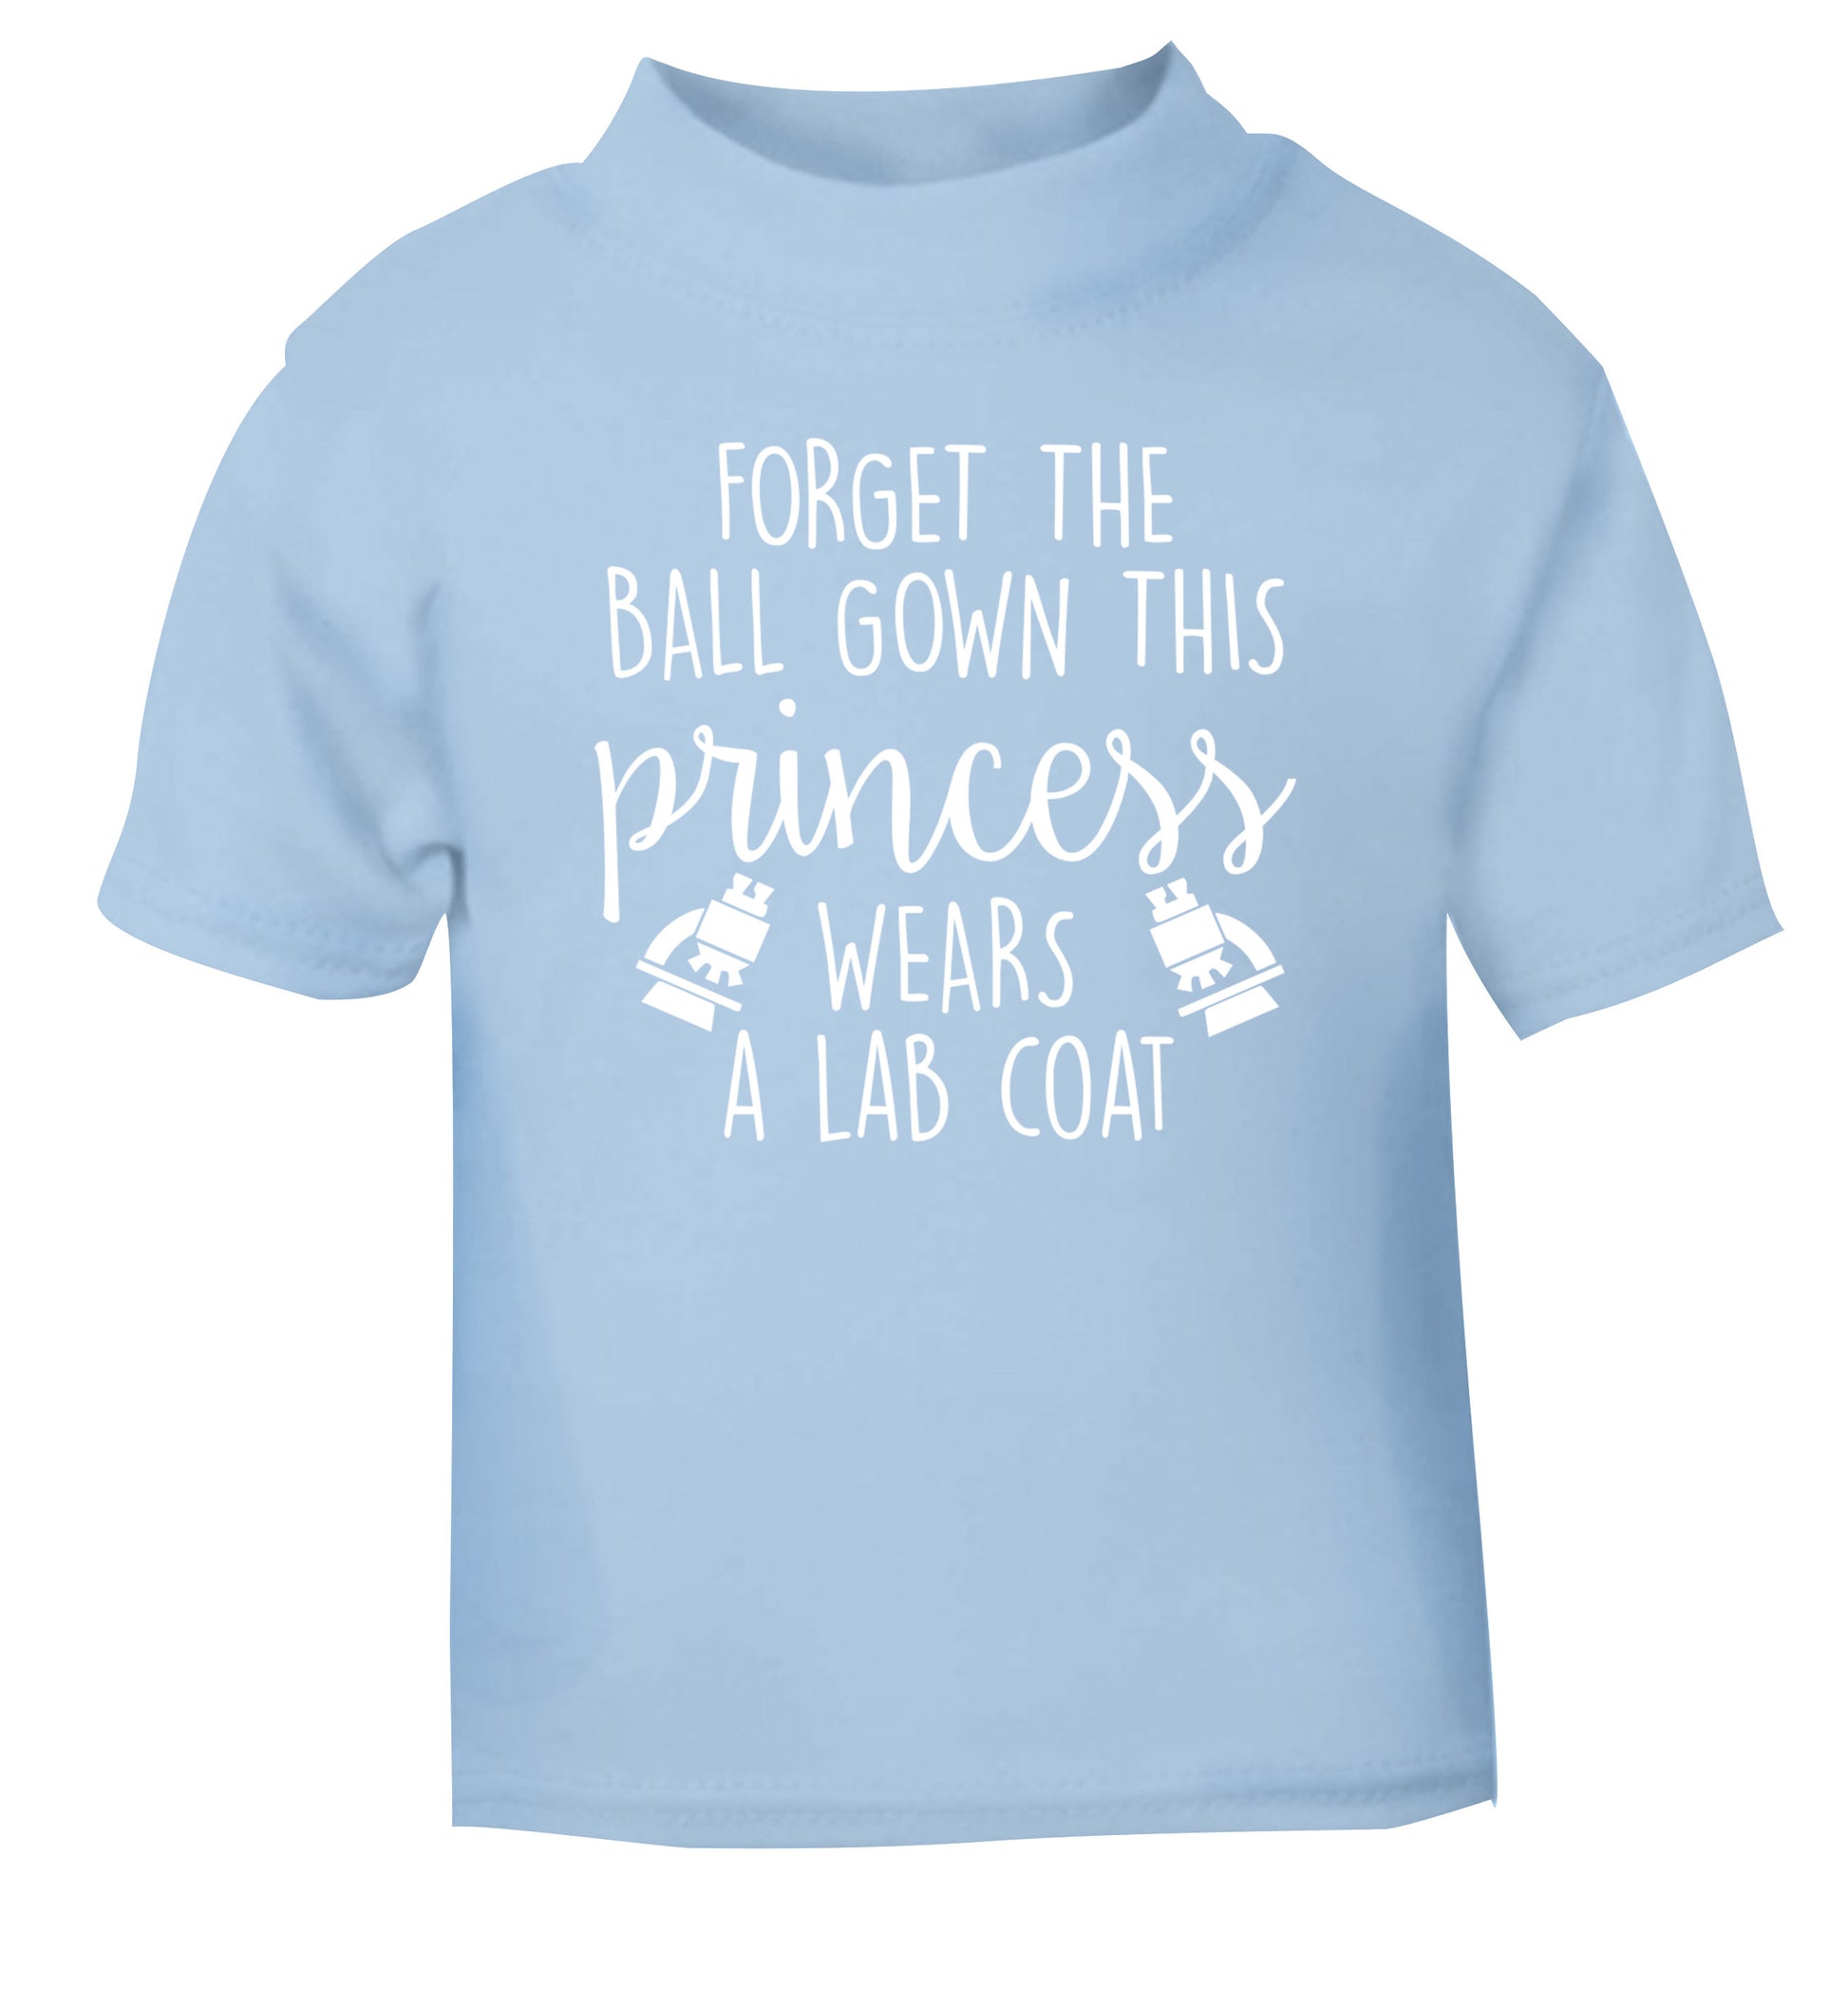 Forget the ball gown this princess wears a lab coat light blue Baby Toddler Tshirt 2 Years